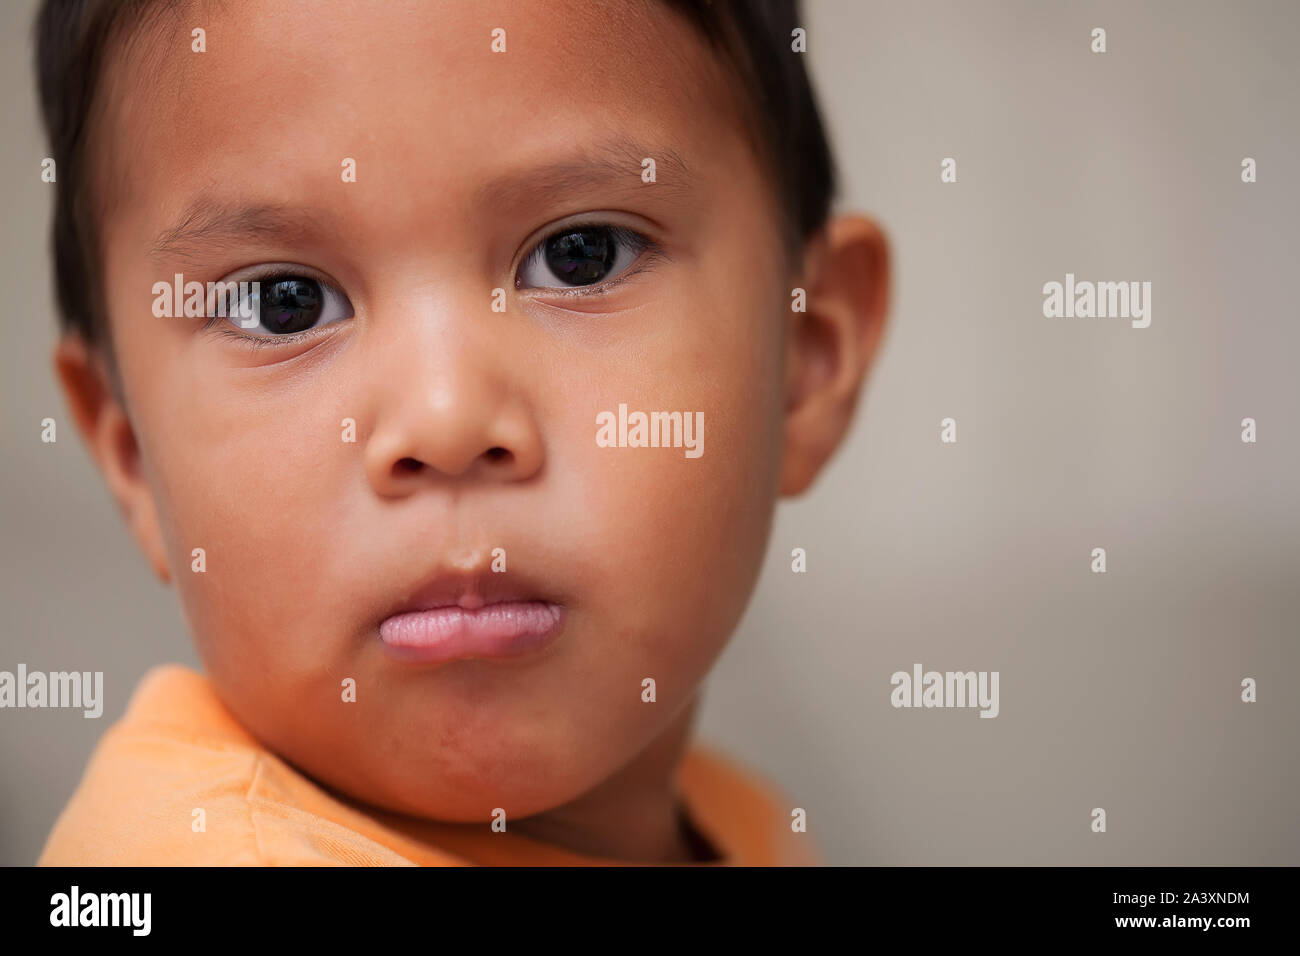 An upset look, facial expression or long face by a little boy that has been reprimanded for bad behavior. Stock Photo